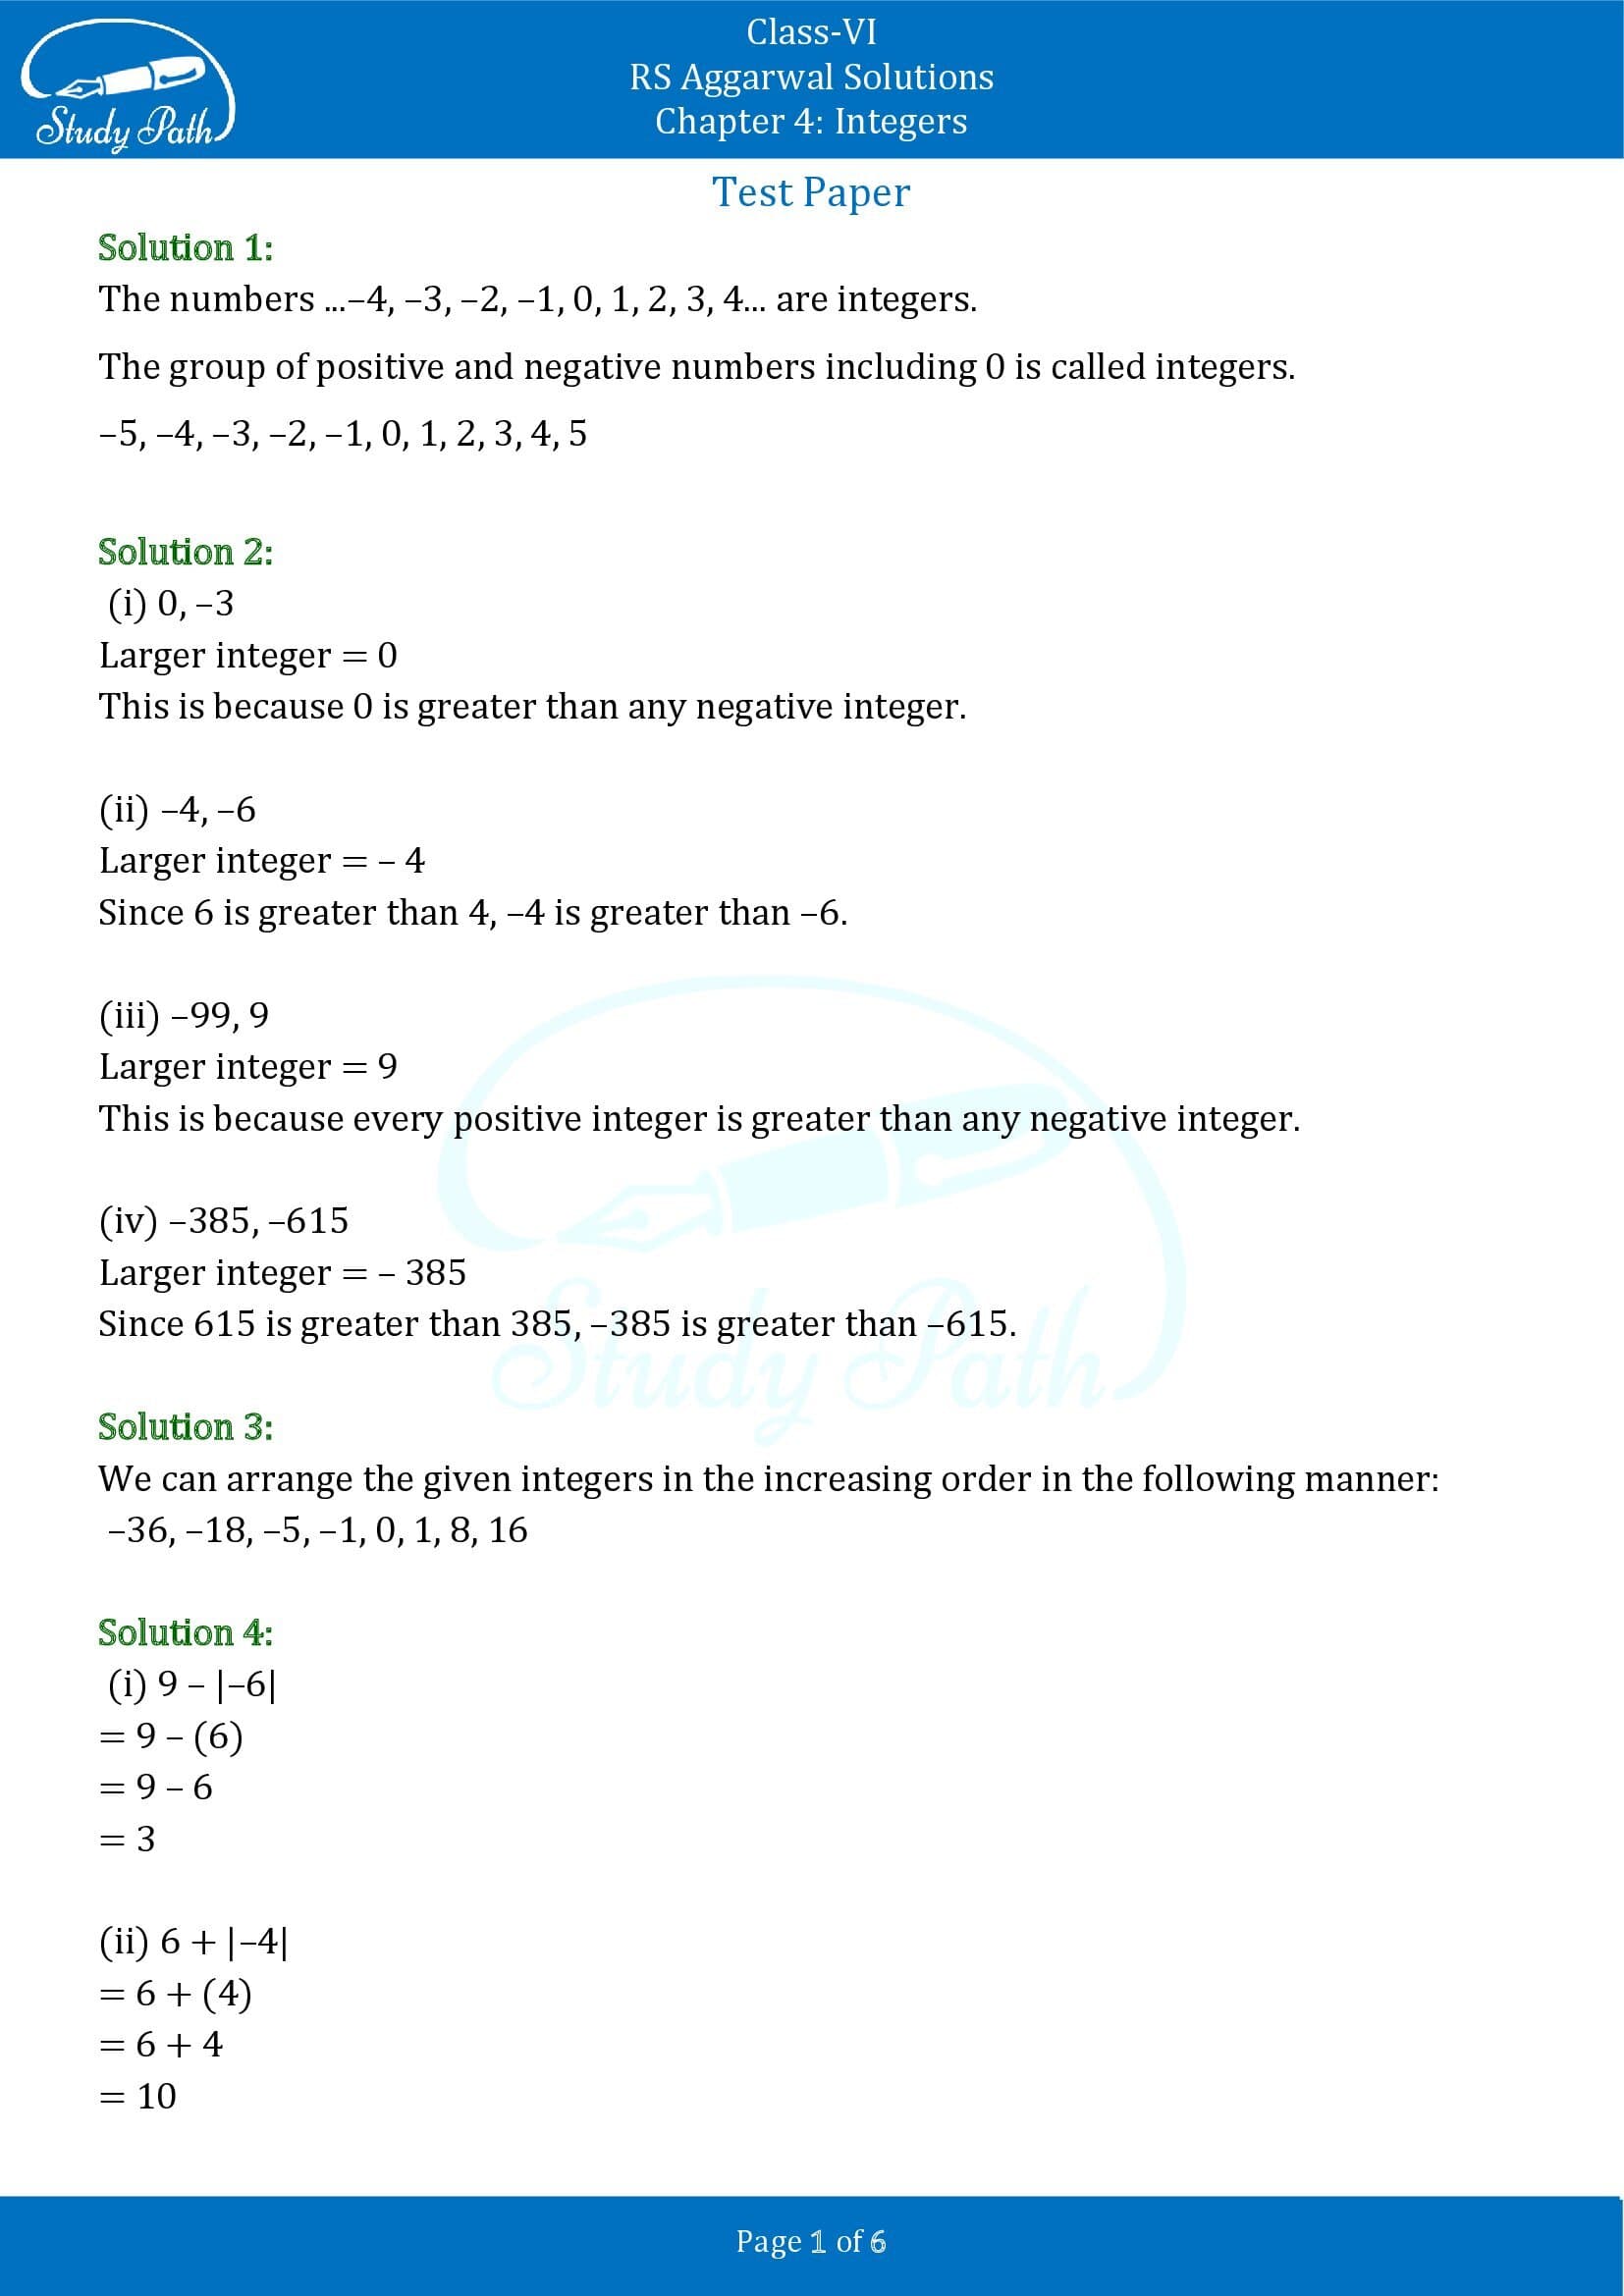 RS Aggarwal Solutions Class 6 Chapter 4 Integers Test Paper 00001